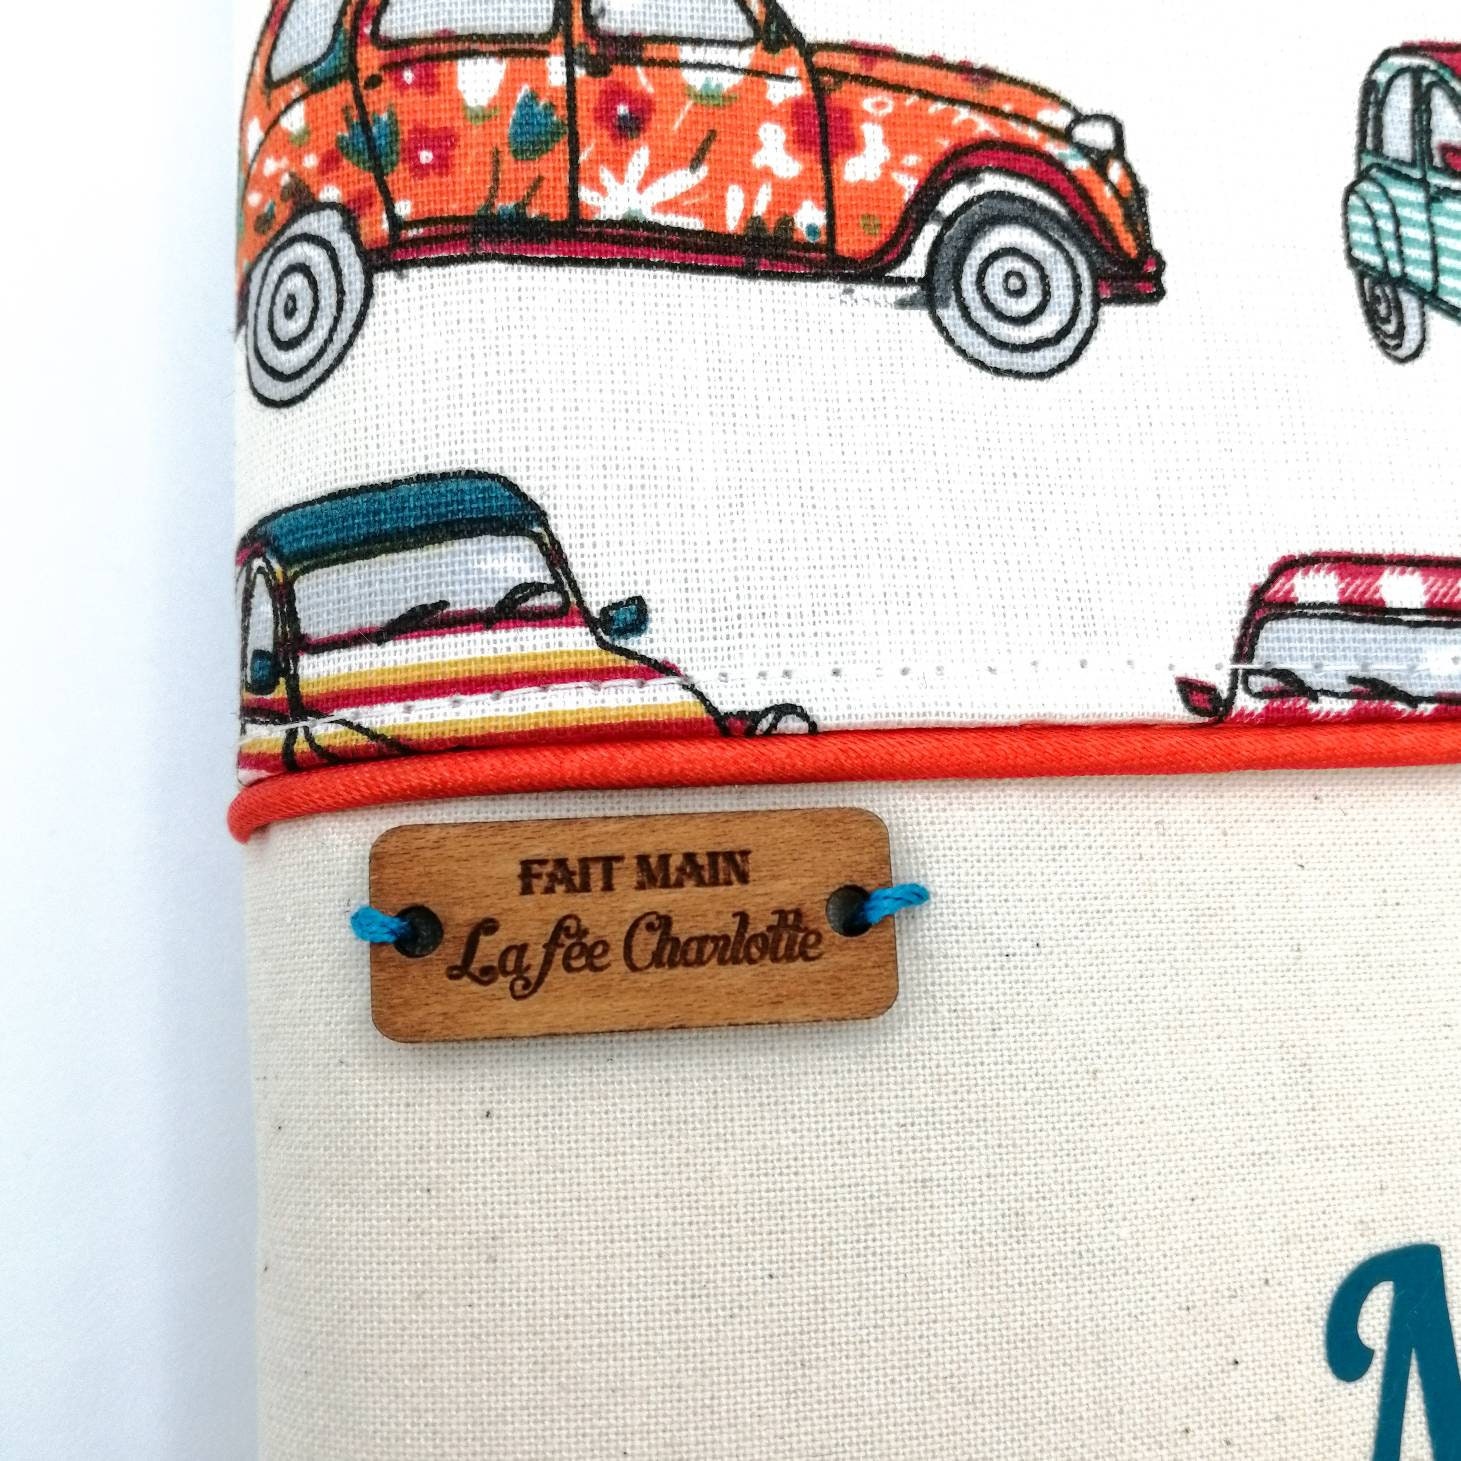 Personalized birth box for baby boy with first name, Citroën 2CV cars